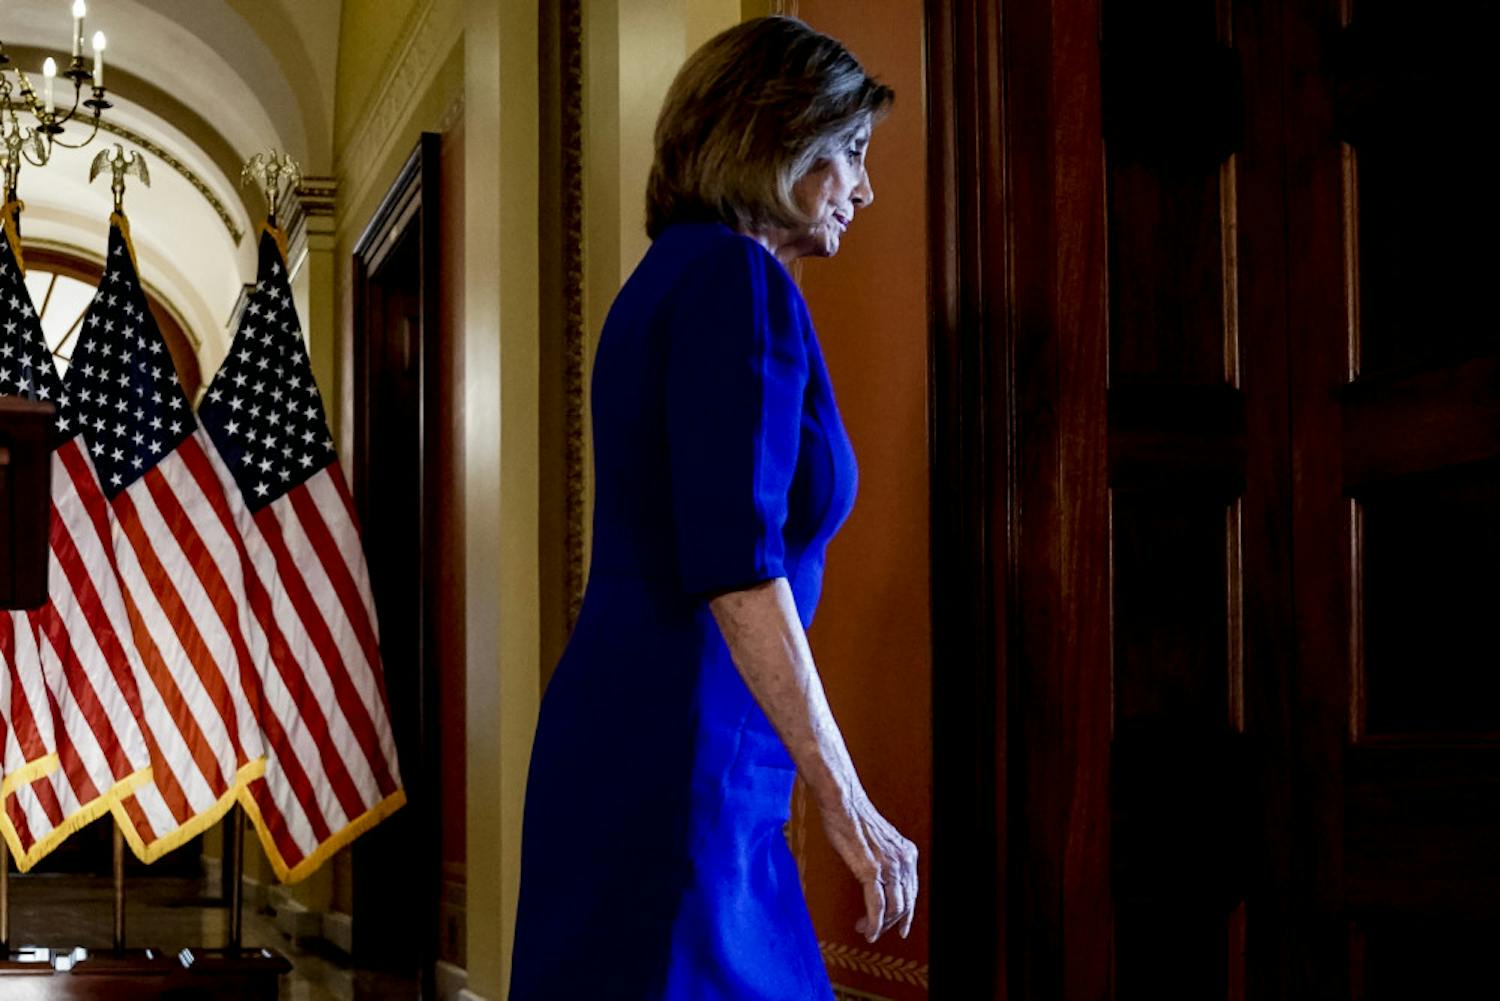 House Speaker Nancy Pelosi, D-Calif., steps away from a podium after reading a statement announcing a formal impeachment inquiry into President Donald Trump, on Capitol Hill in Washington, Tuesday, Sept. 24, 2019. (AP Photo/Andrew Harnik)